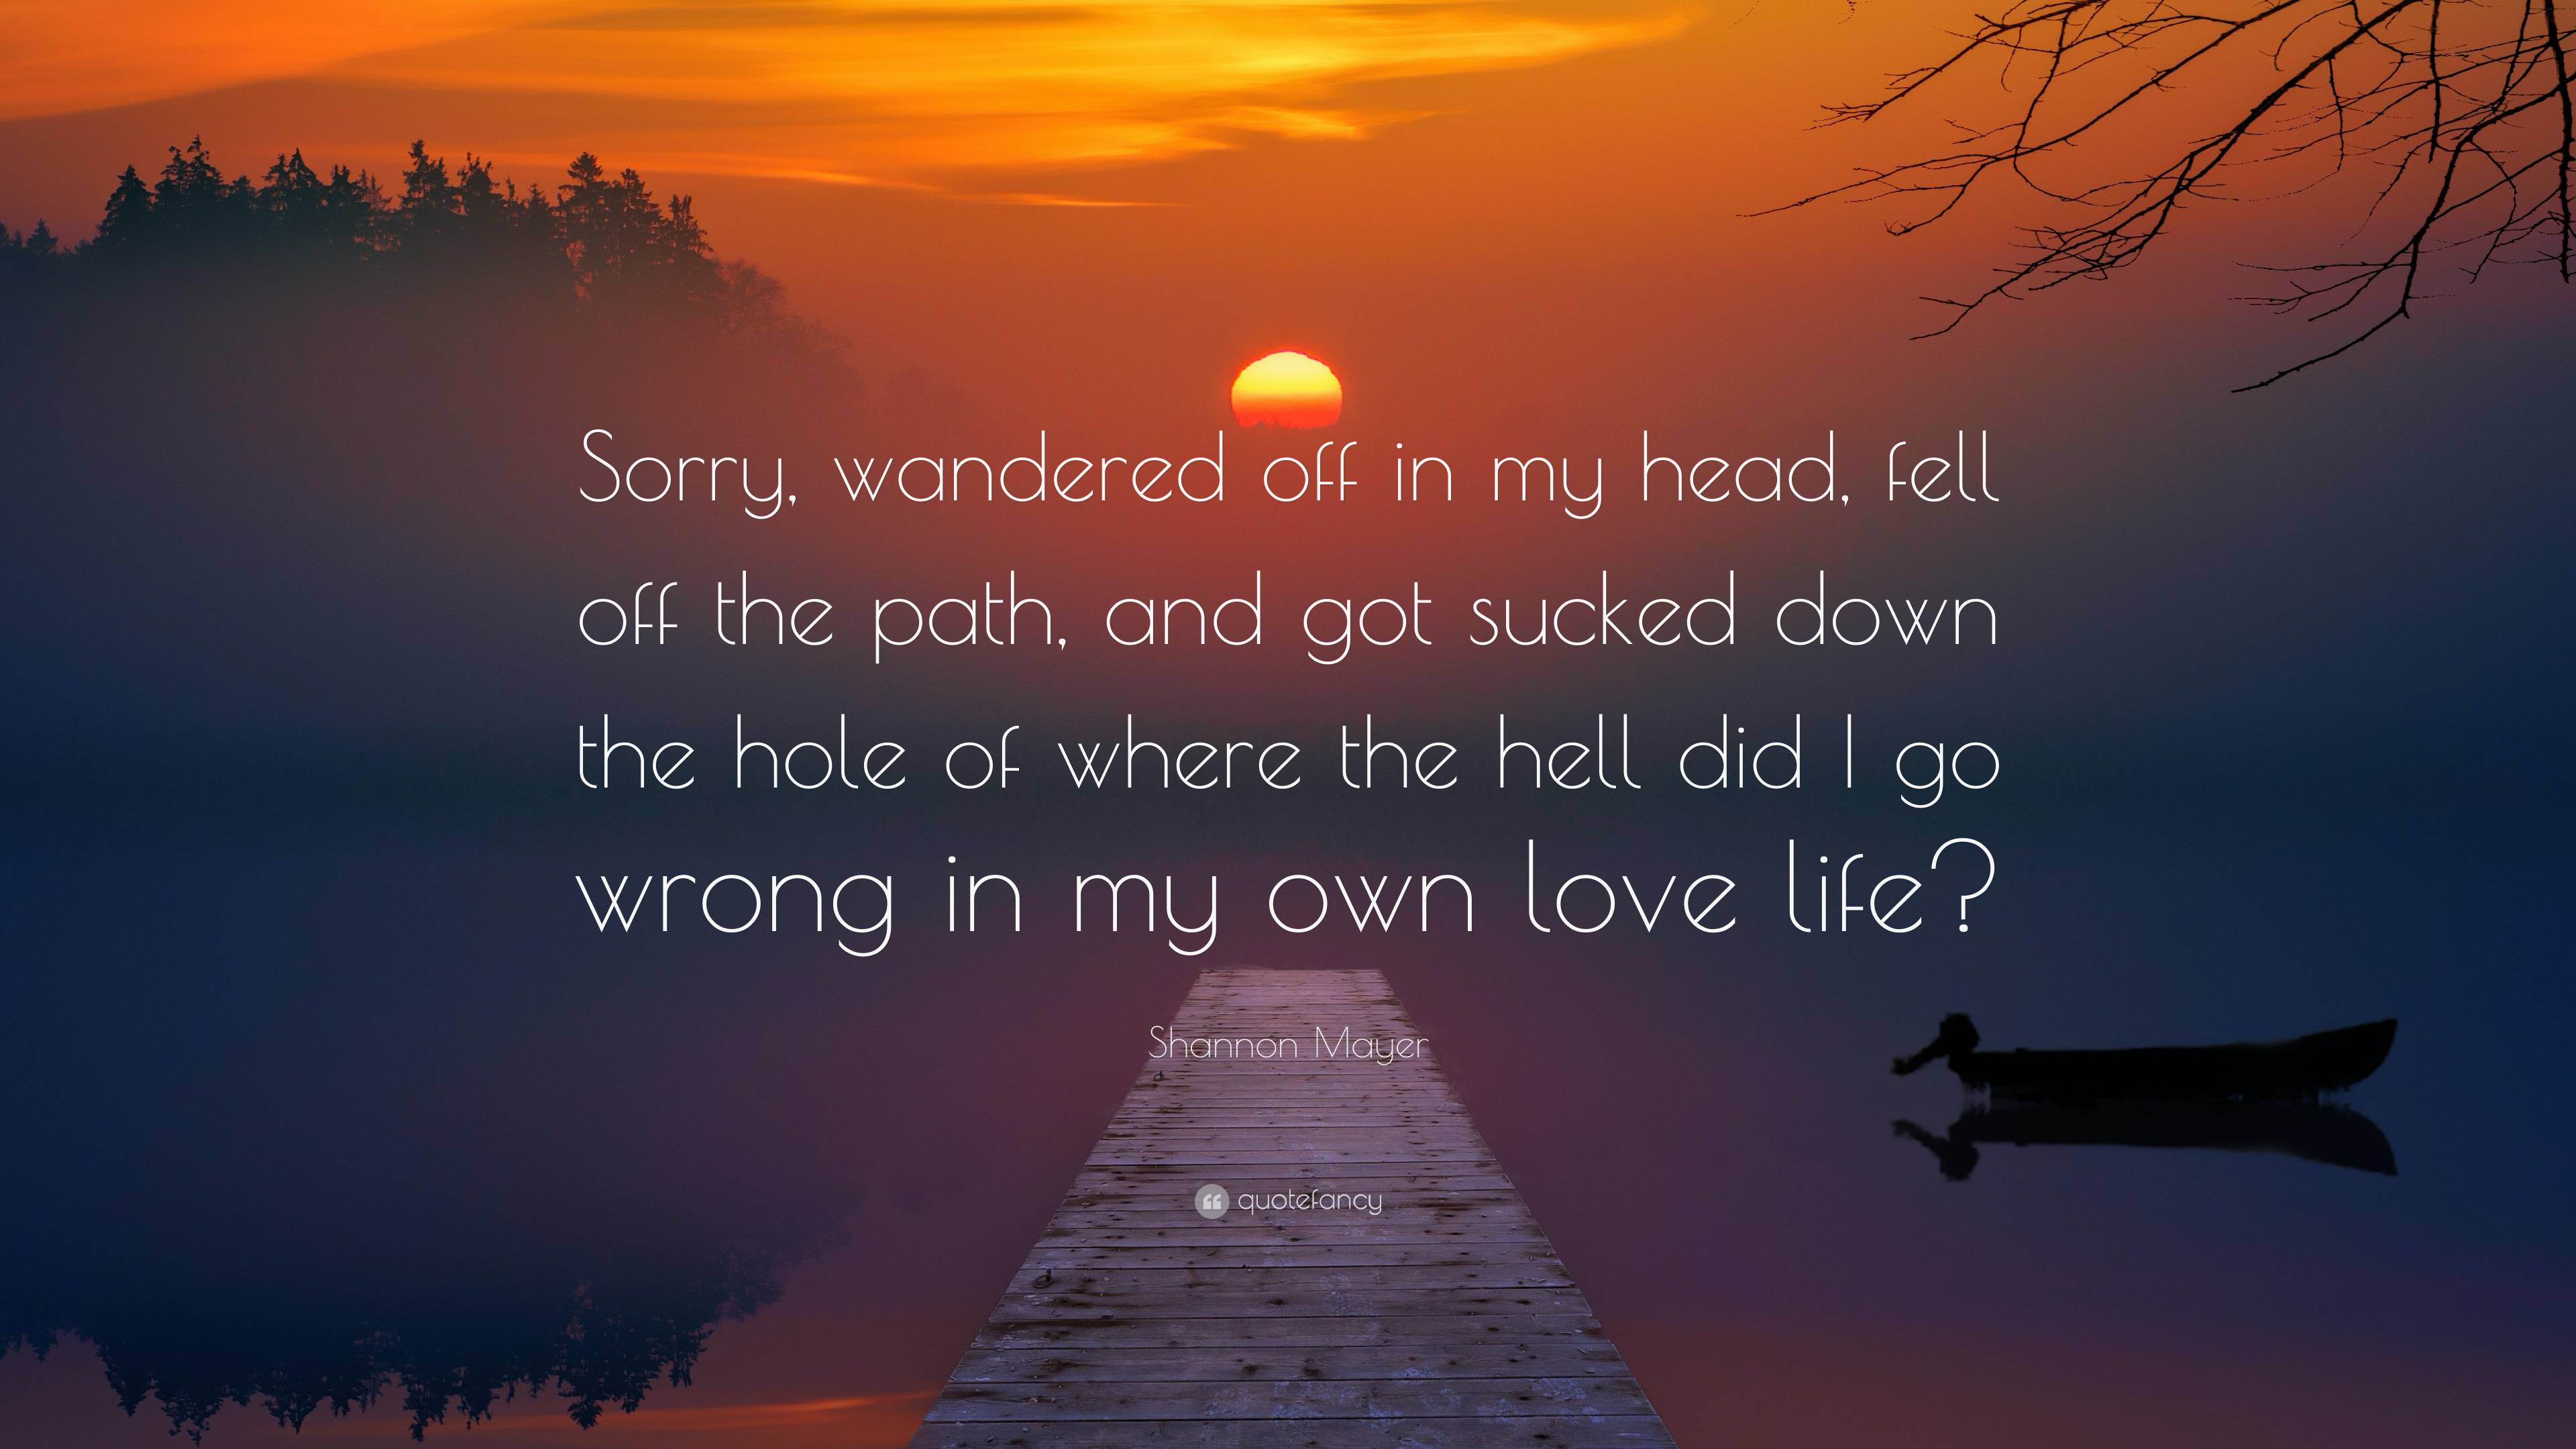 Shannon Mayer Quote: “Sorry, wandered off in my head, fell off the path ...